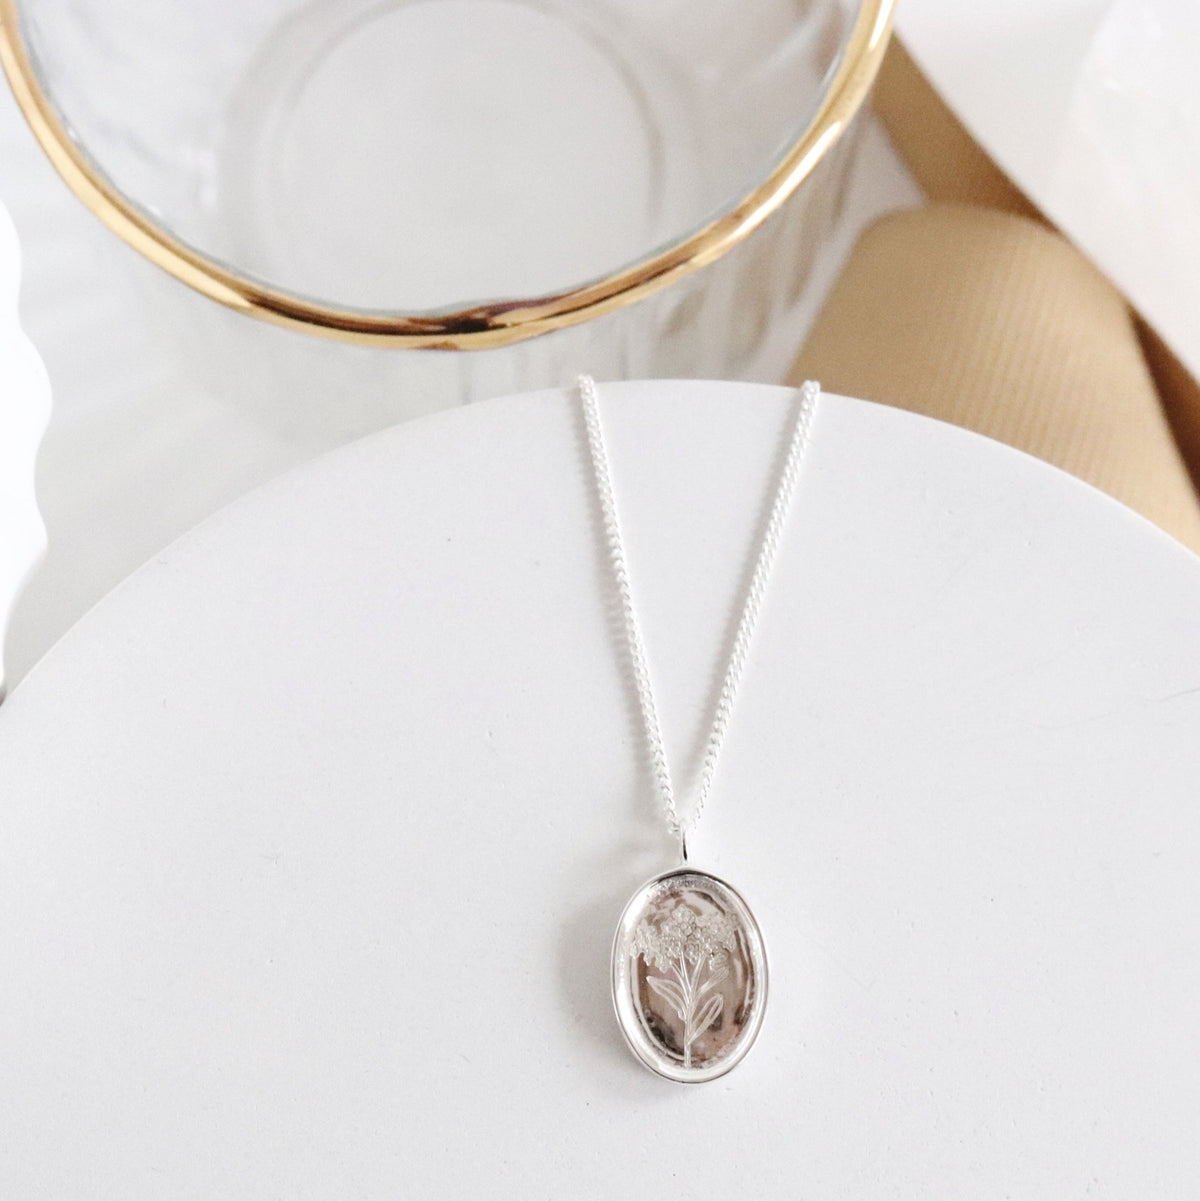 FRAICHE INSPIRE FORGET ME NOT NECKLACE - SILVER - SO PRETTY CARA COTTER